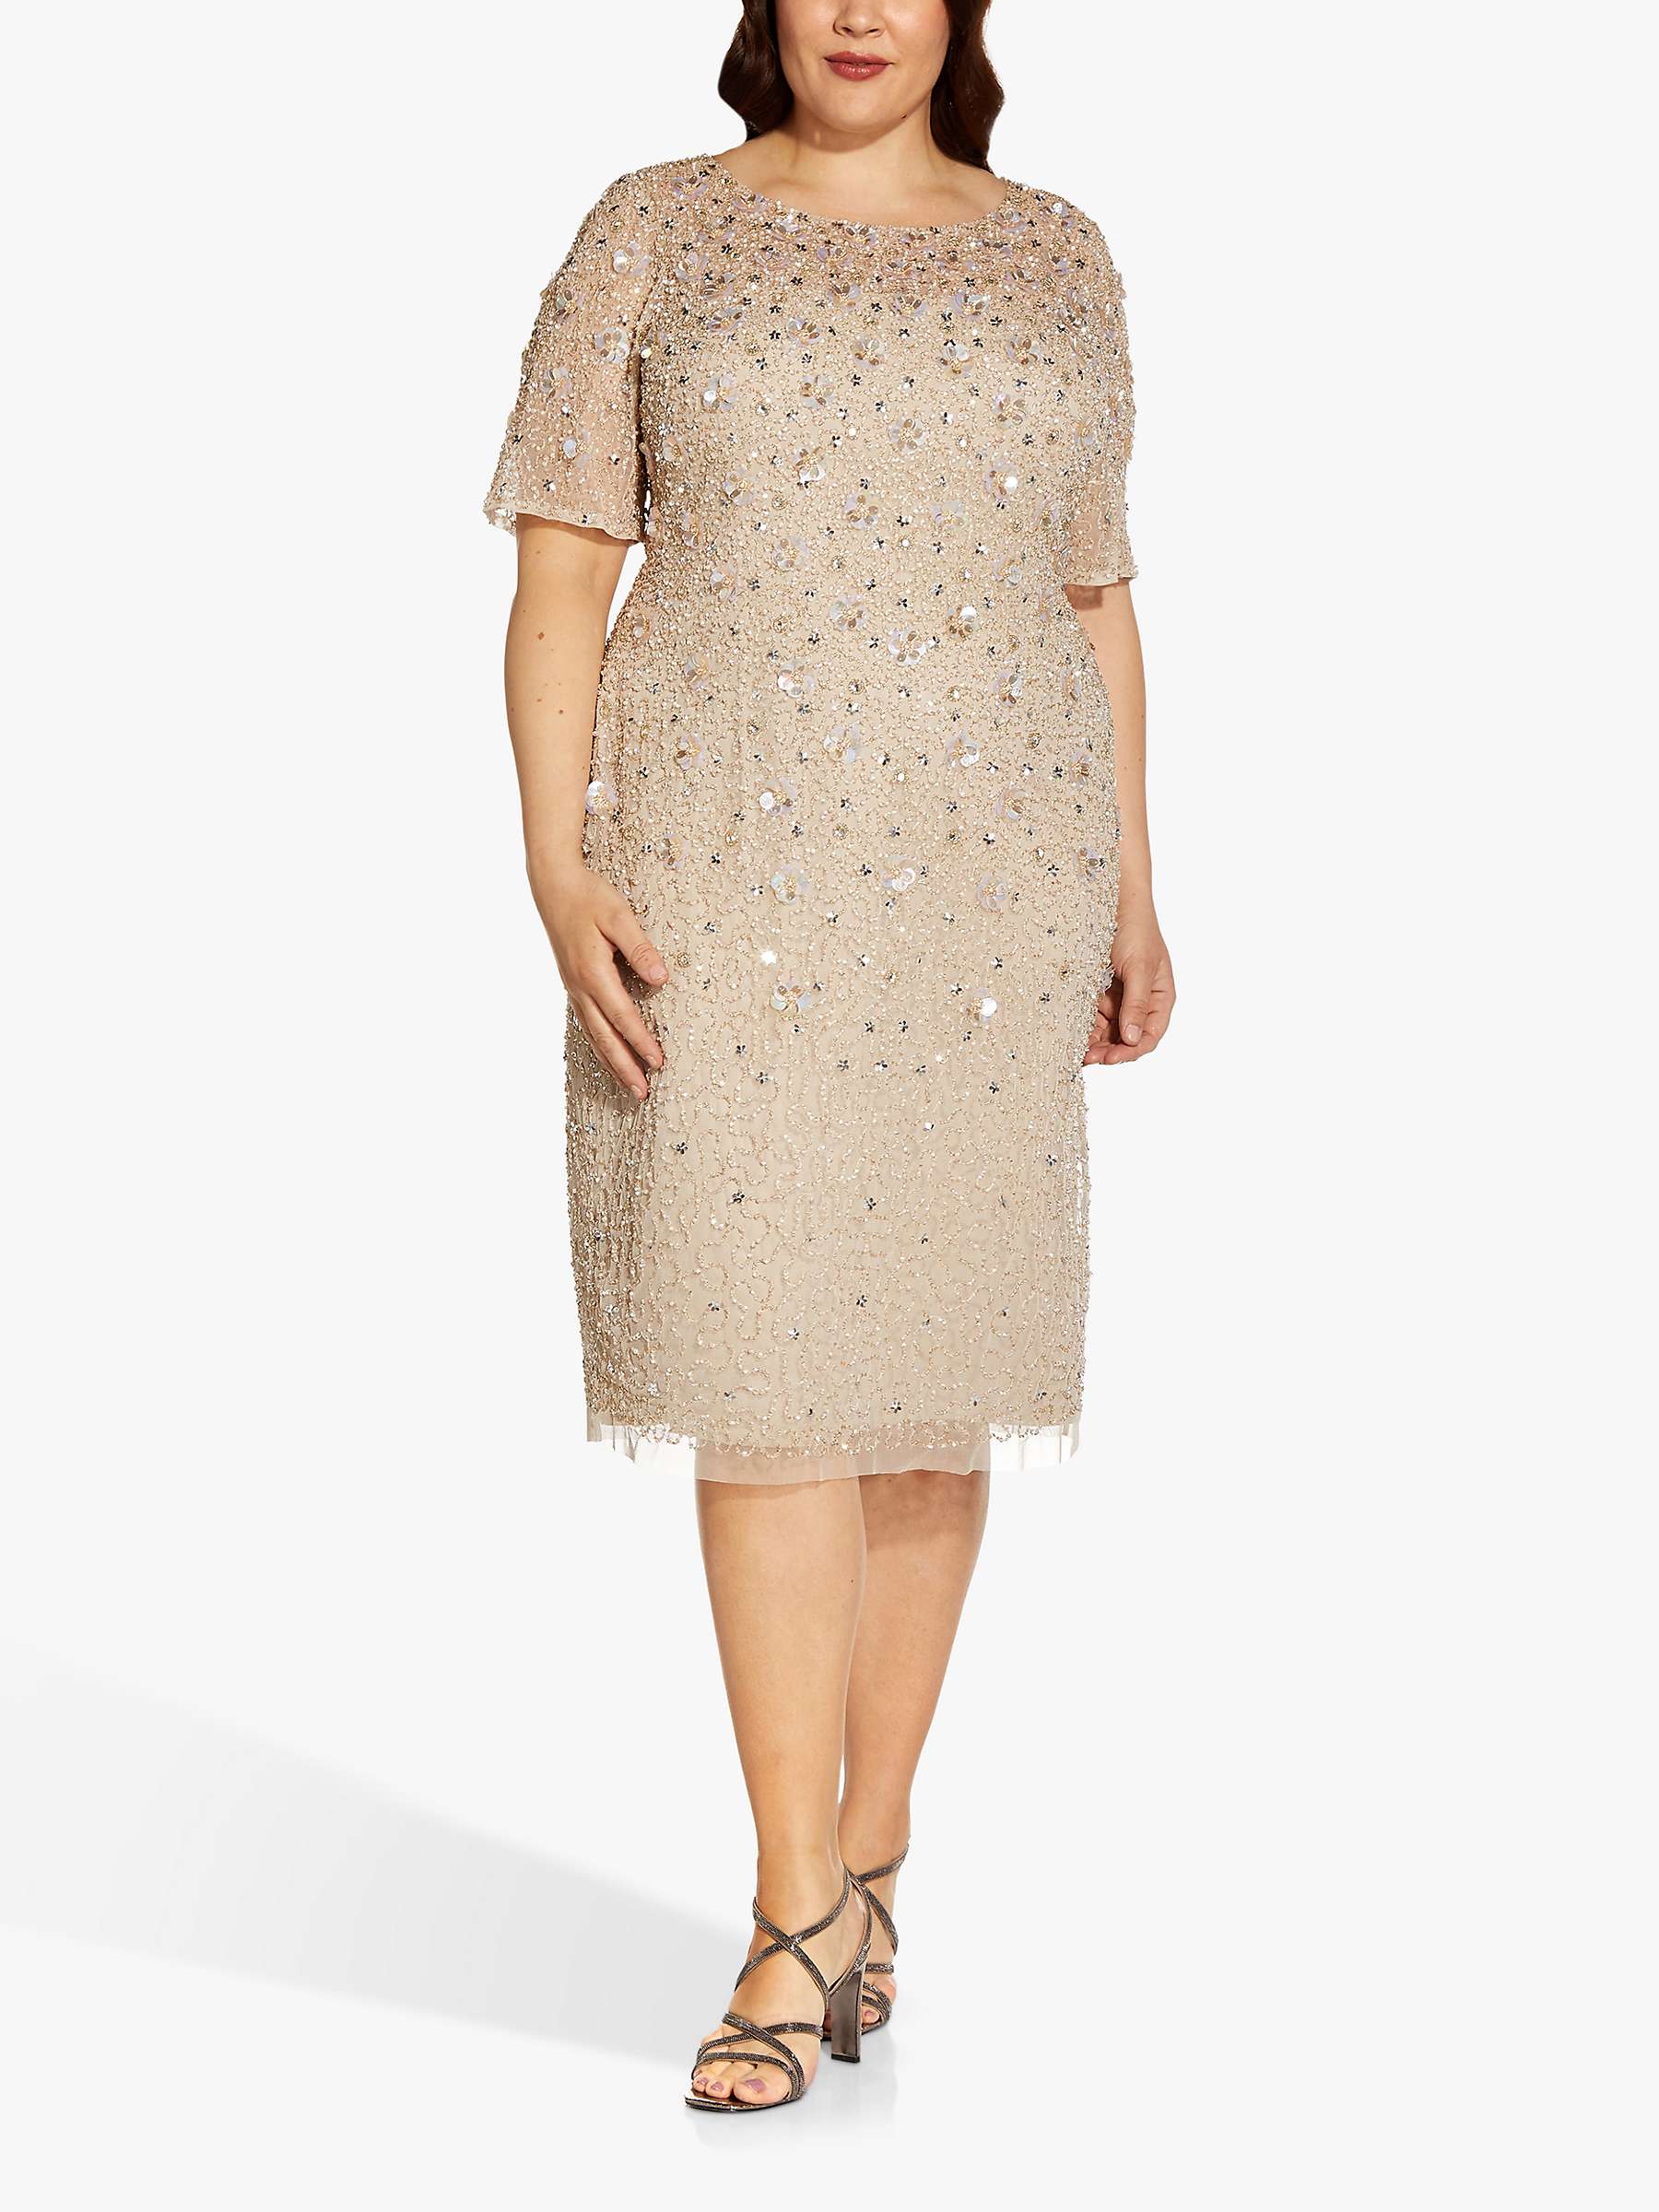 Adrianna Papell Plus Size Floral Sequin Cocktail Dress, Biscotti at